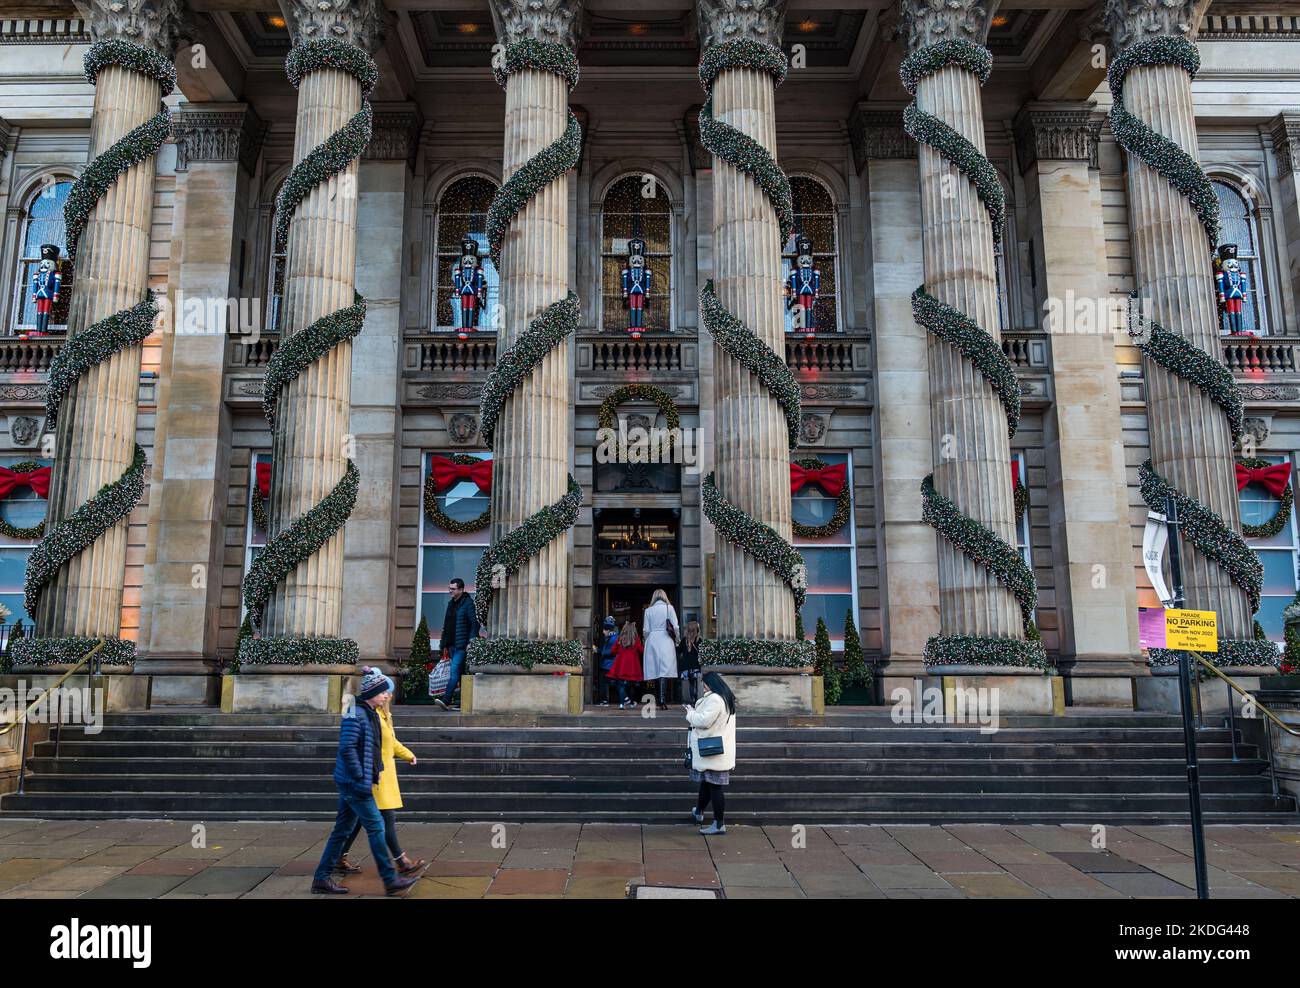 George Street, Edinburgh, Scotland, UK, 6th November 2022. Dome Christmas Lights: the Dome’s traditional Christmas decorations of  garlands and nutcracker soldiers are already in place on the front of the neoclassical building. Credit: Sally Anderson/Alamy Live News Stock Photo